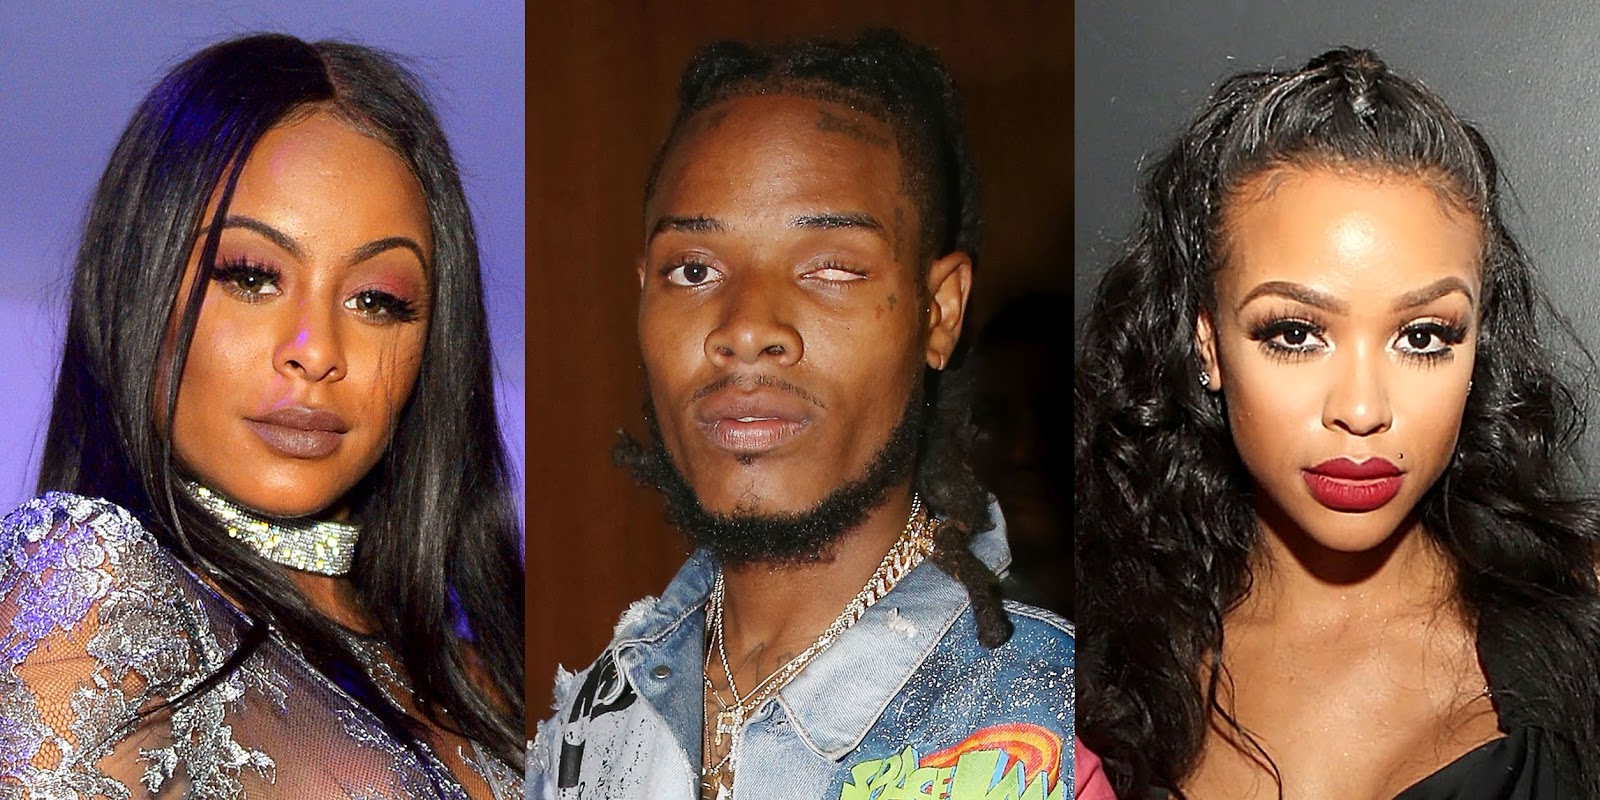 The Love & Hip Hop star and her on-again, off-again boyfriend, rapper F...